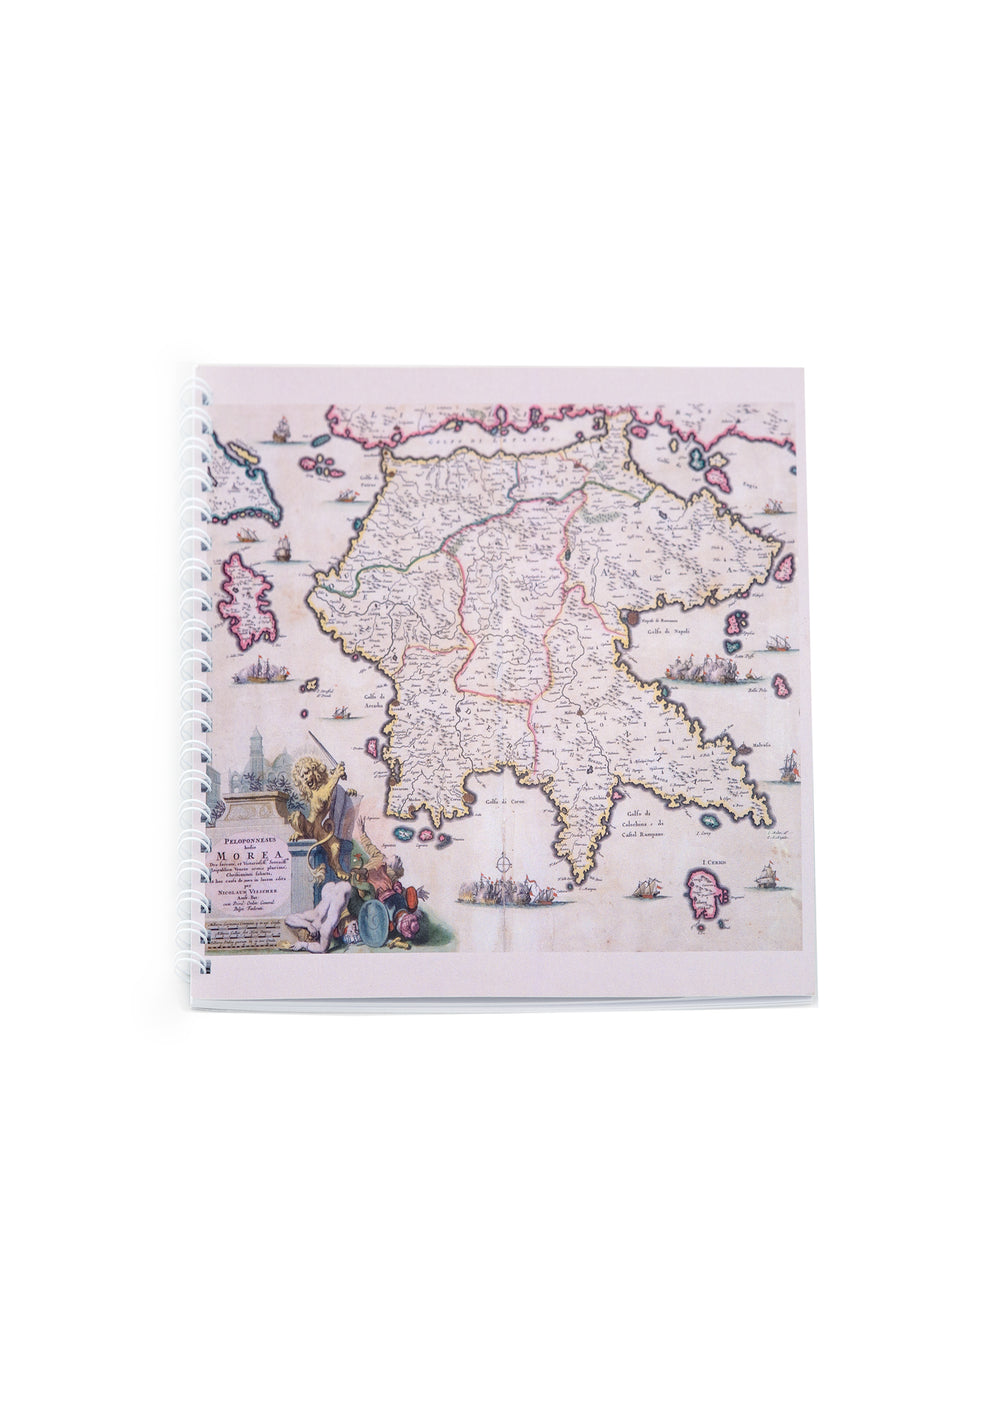 Notebook with a Peloponnese map